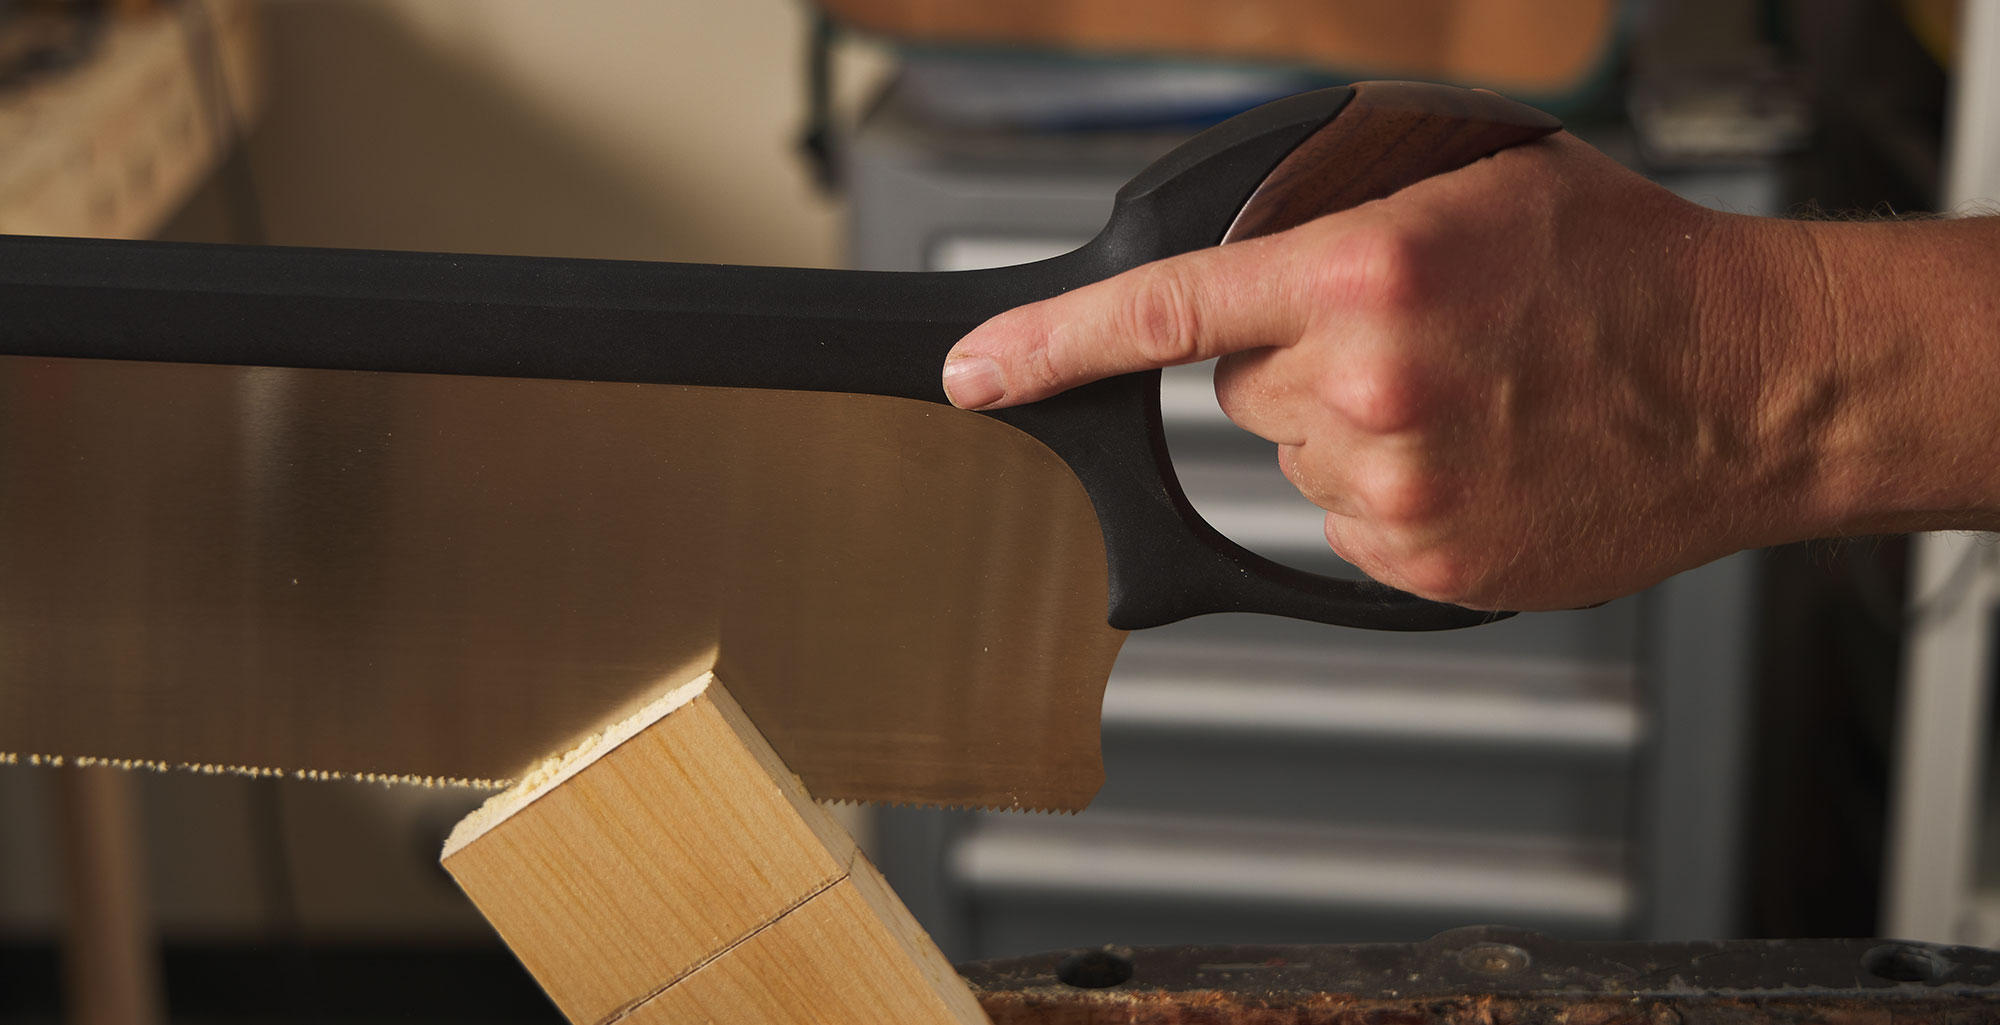 Holding the saw with a three-fingered grip while cutting